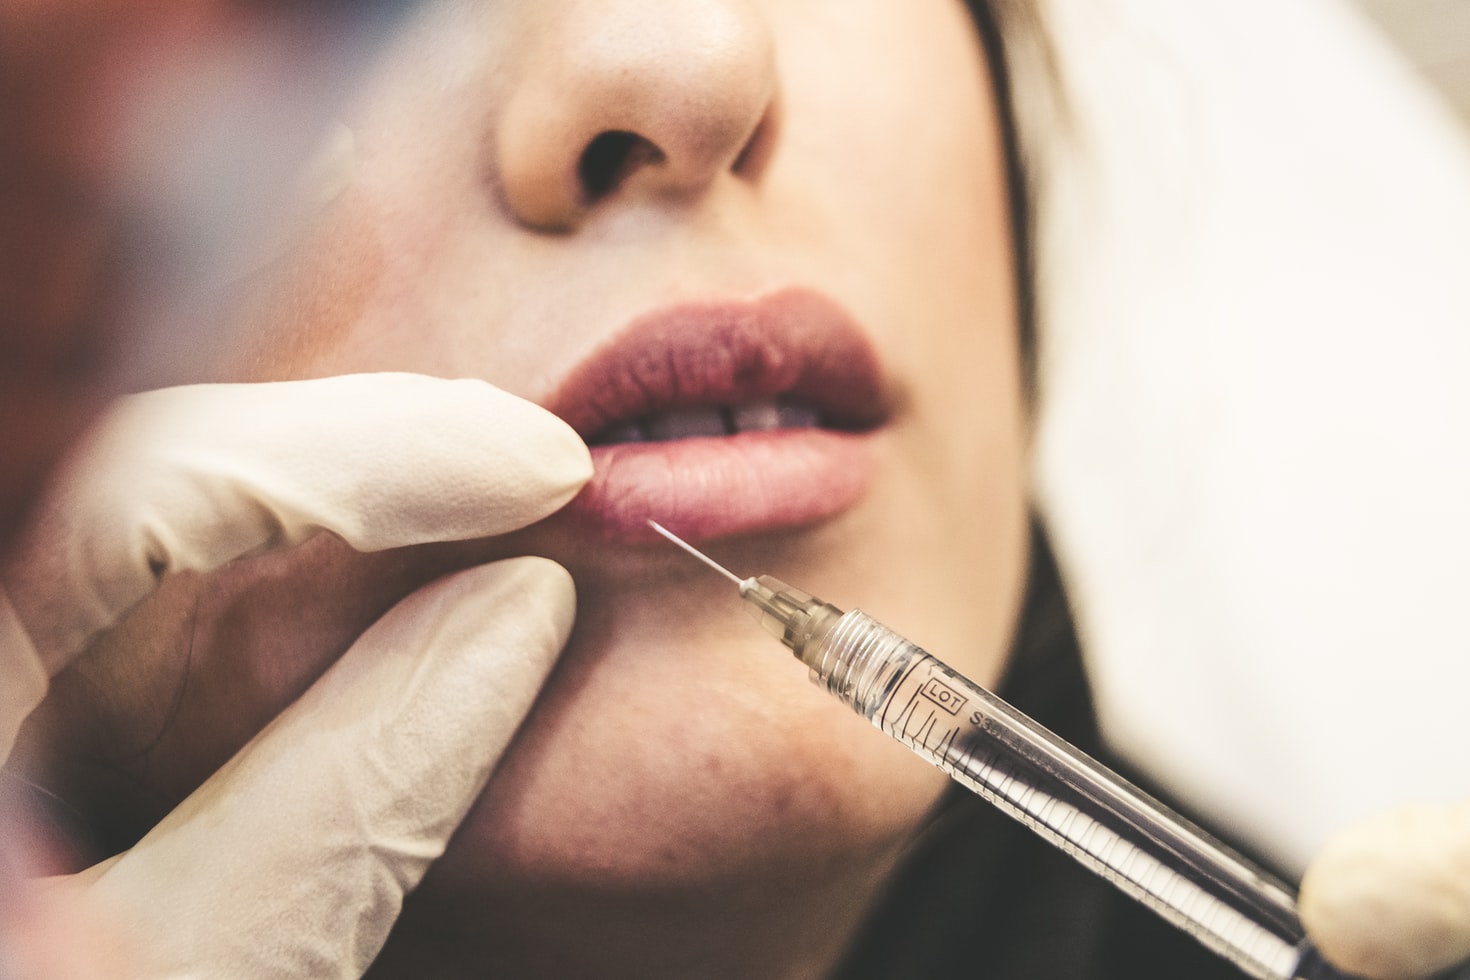 What you need to know about lip filler injections